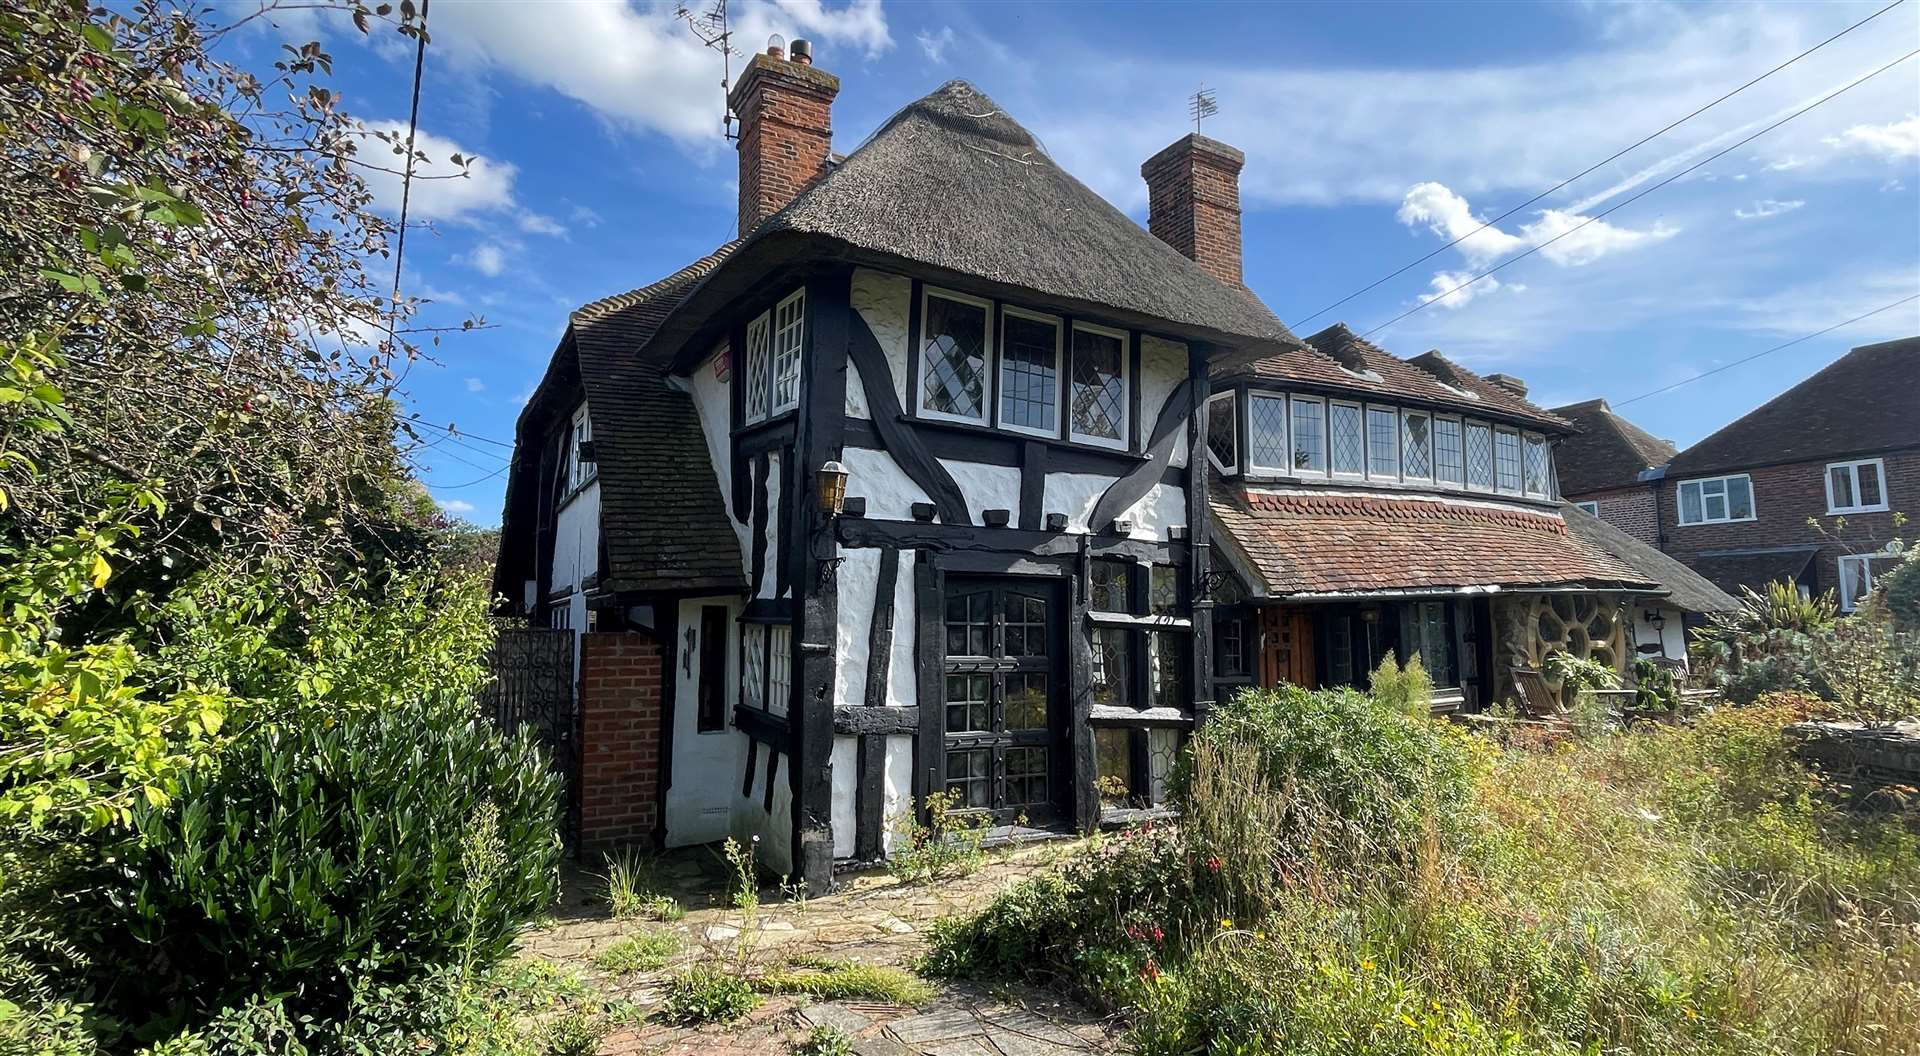 The Paddock in Chestfield was described as a substantial period property and sold for £450,000 despite being in need of work.